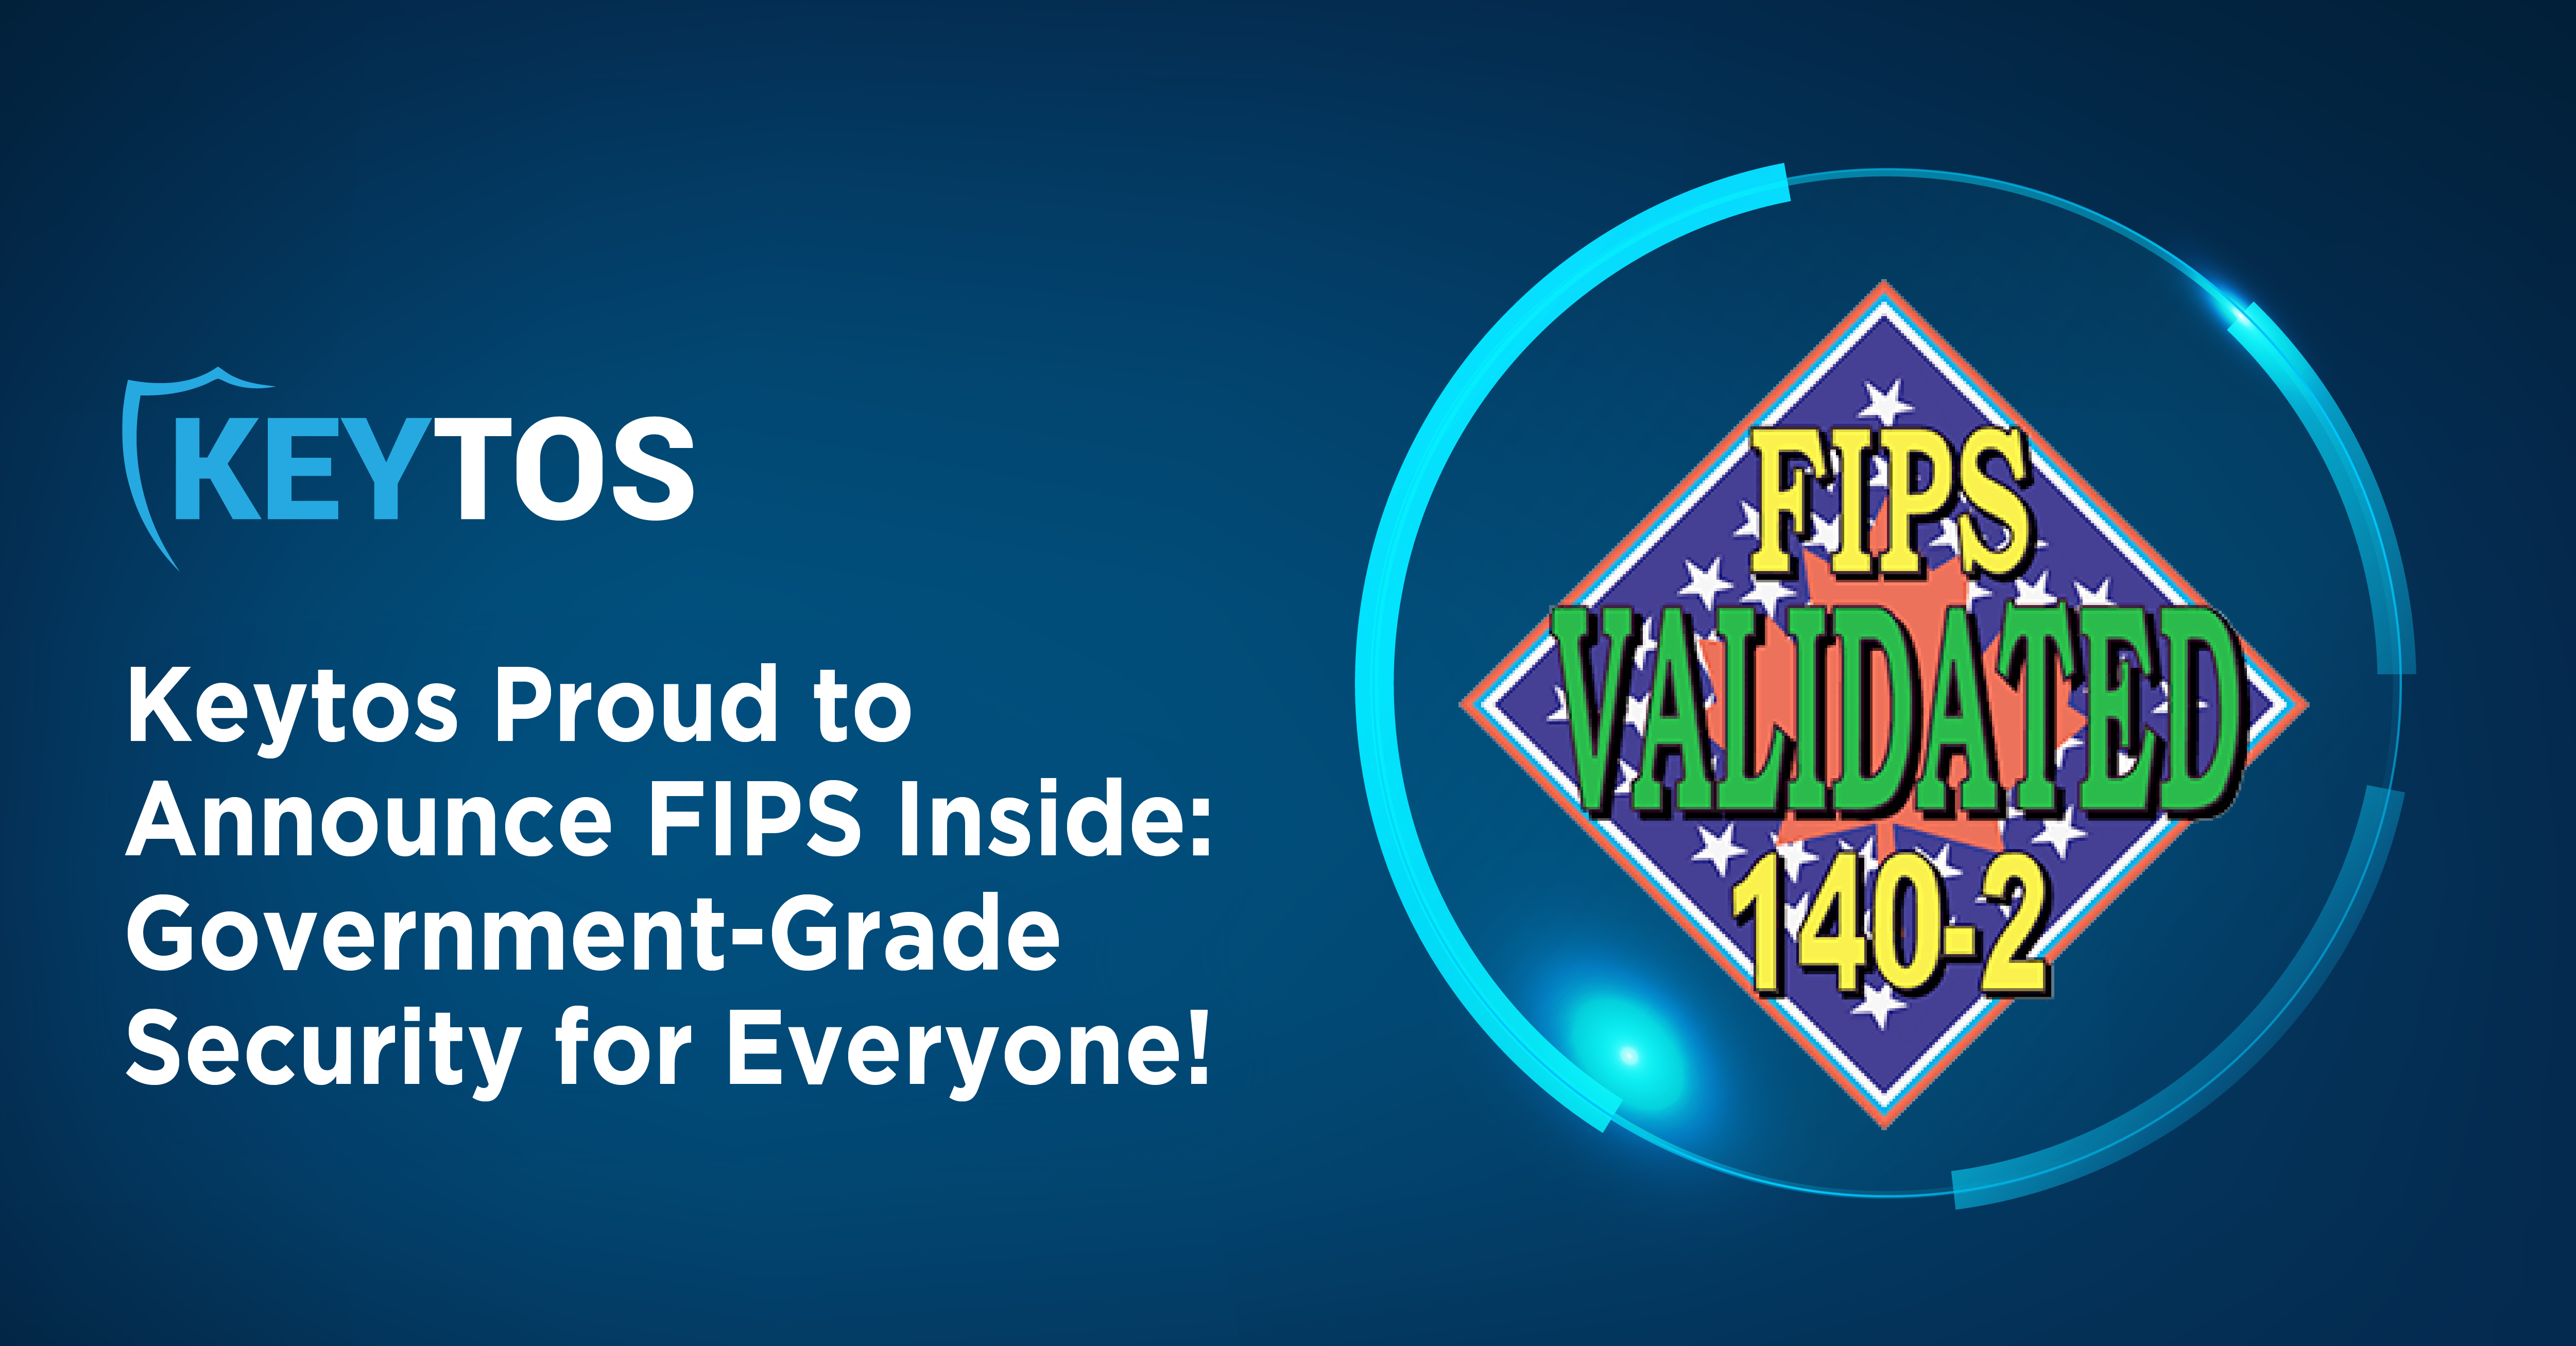 Keytos Proud to Announce FIPS Inside - Government-Grade Security for Everyone!